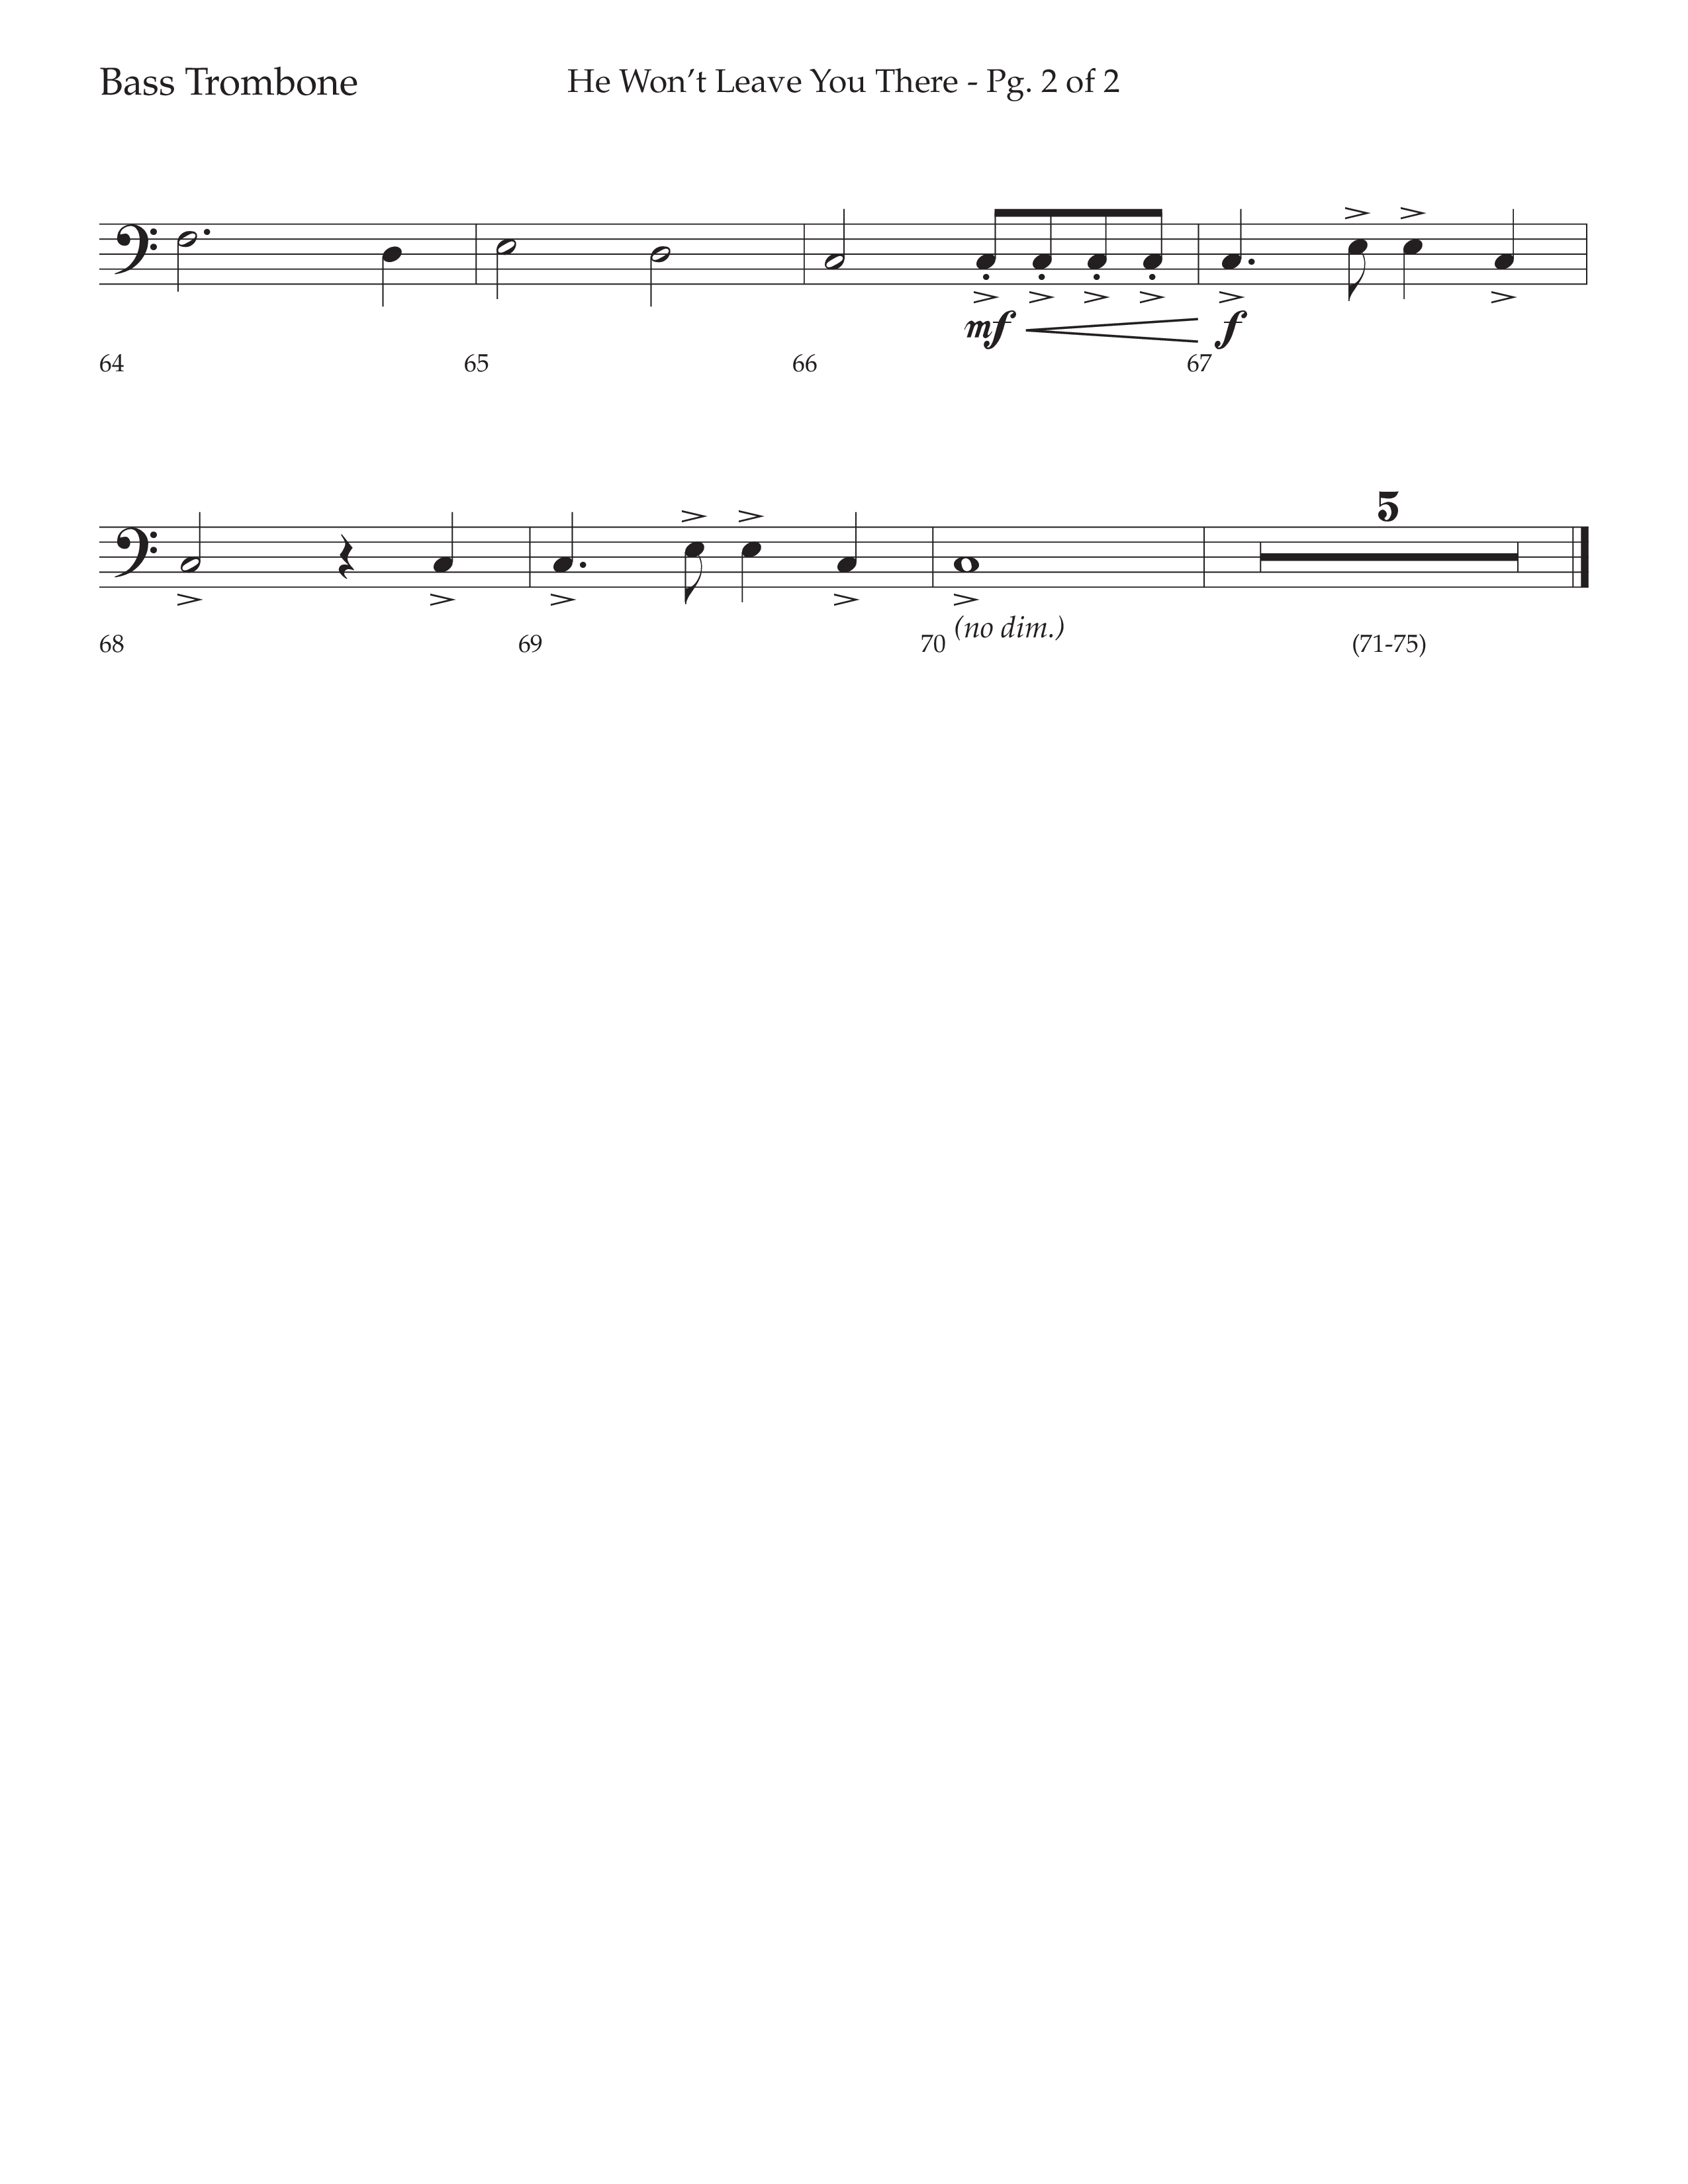 He Won't Leave You There (Choral Anthem SATB) Bass Trombone (Lifeway Choral / Arr. David Wise / Orch. David Shipps)